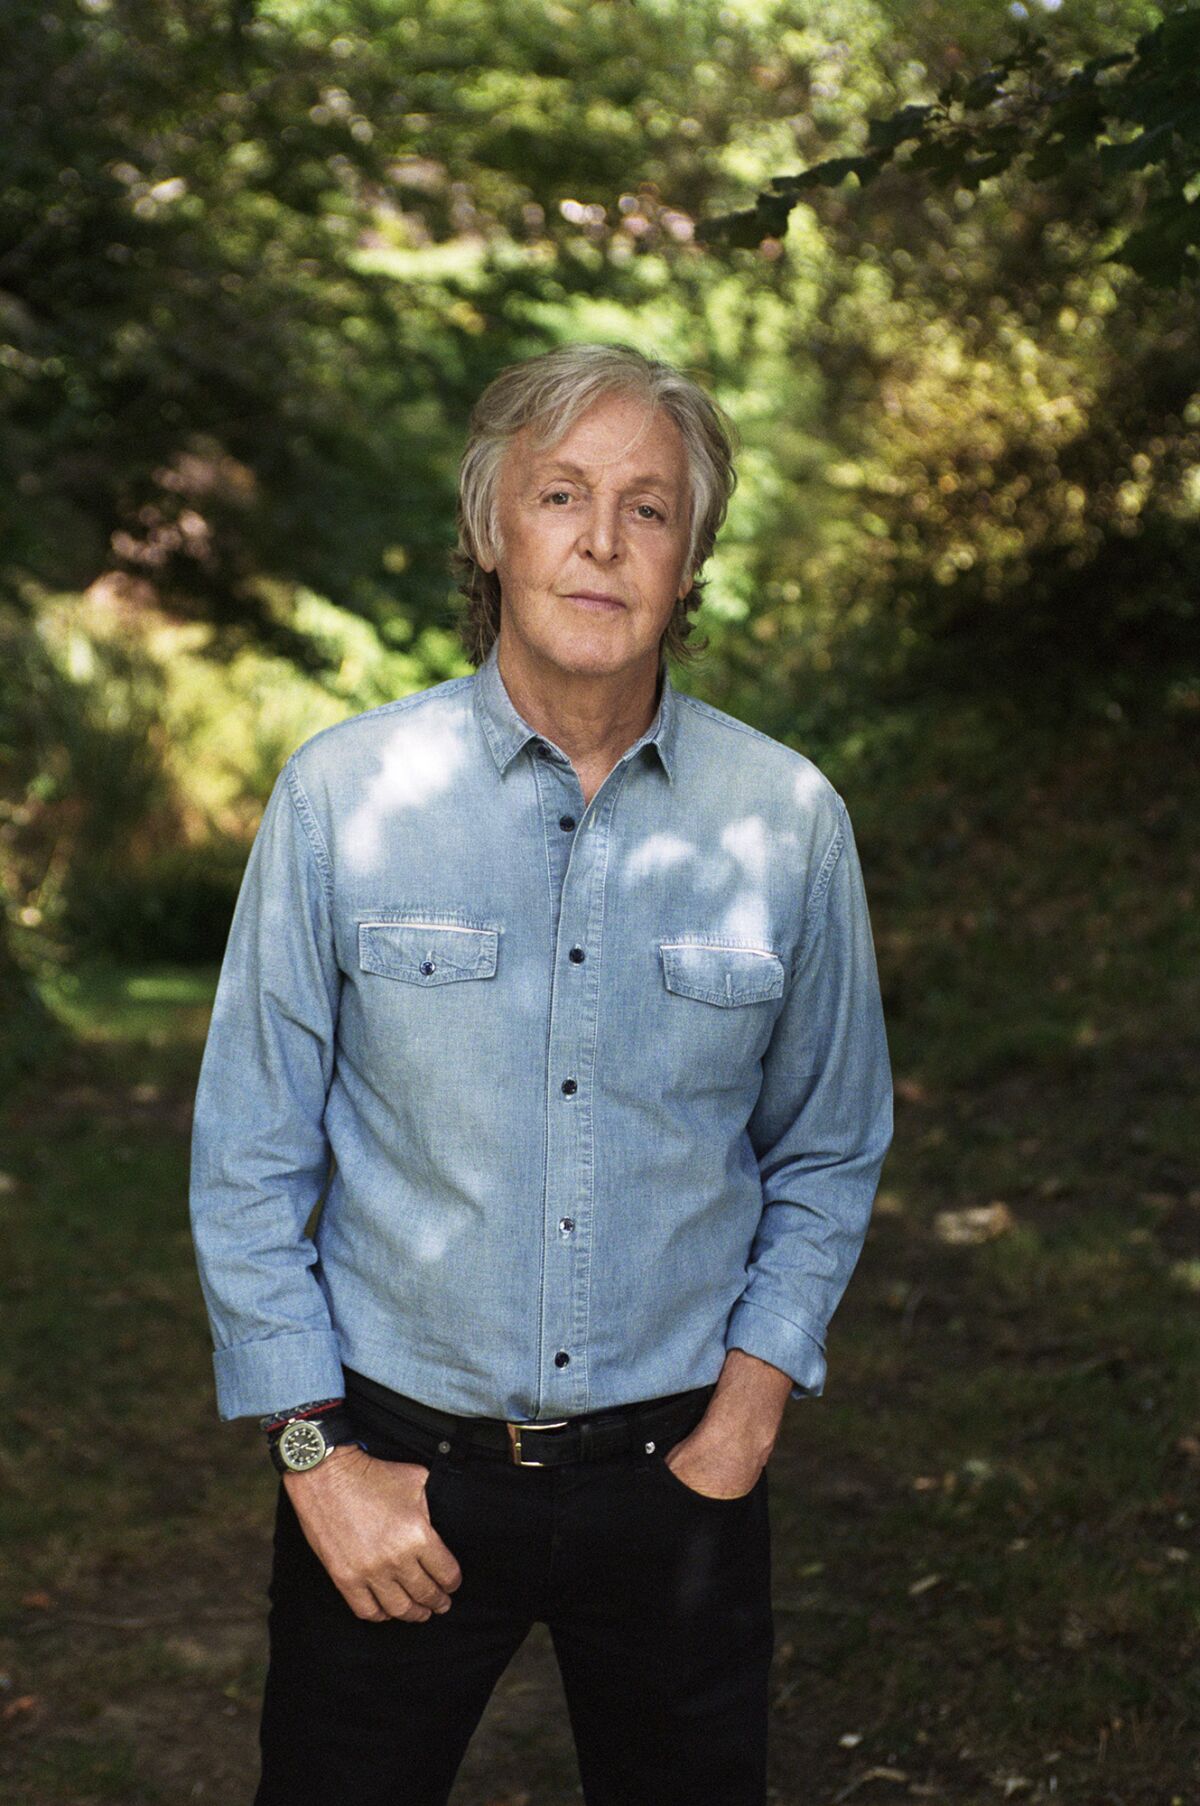 Paul McCartney stands outdoors, hands in pockets, in a blue denim shirt and dark pants.